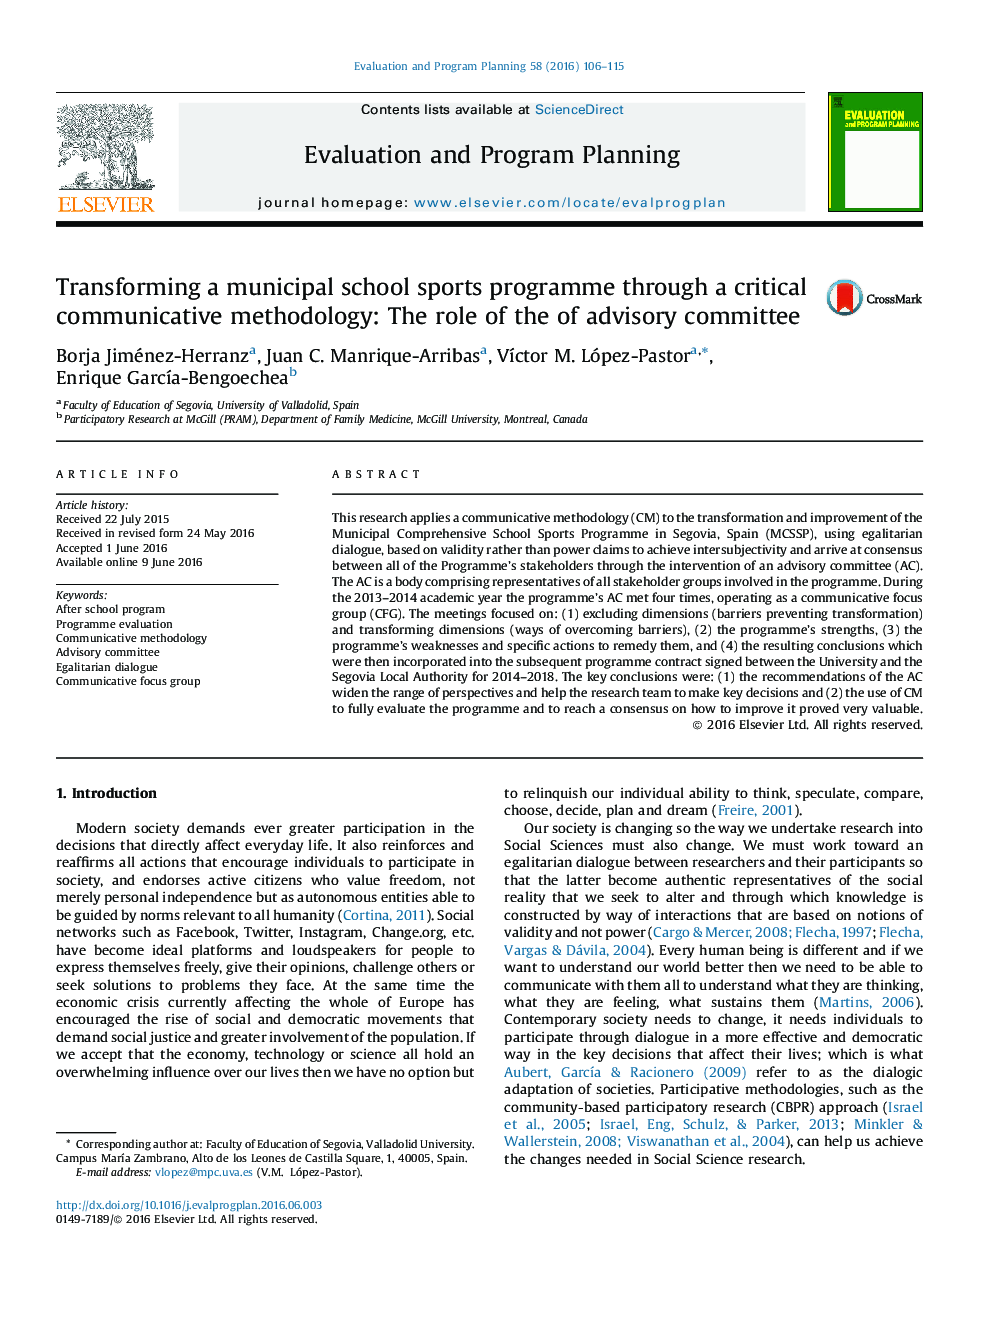 Transforming a municipal school sports programme through a critical communicative methodology: The role of the of advisory committee